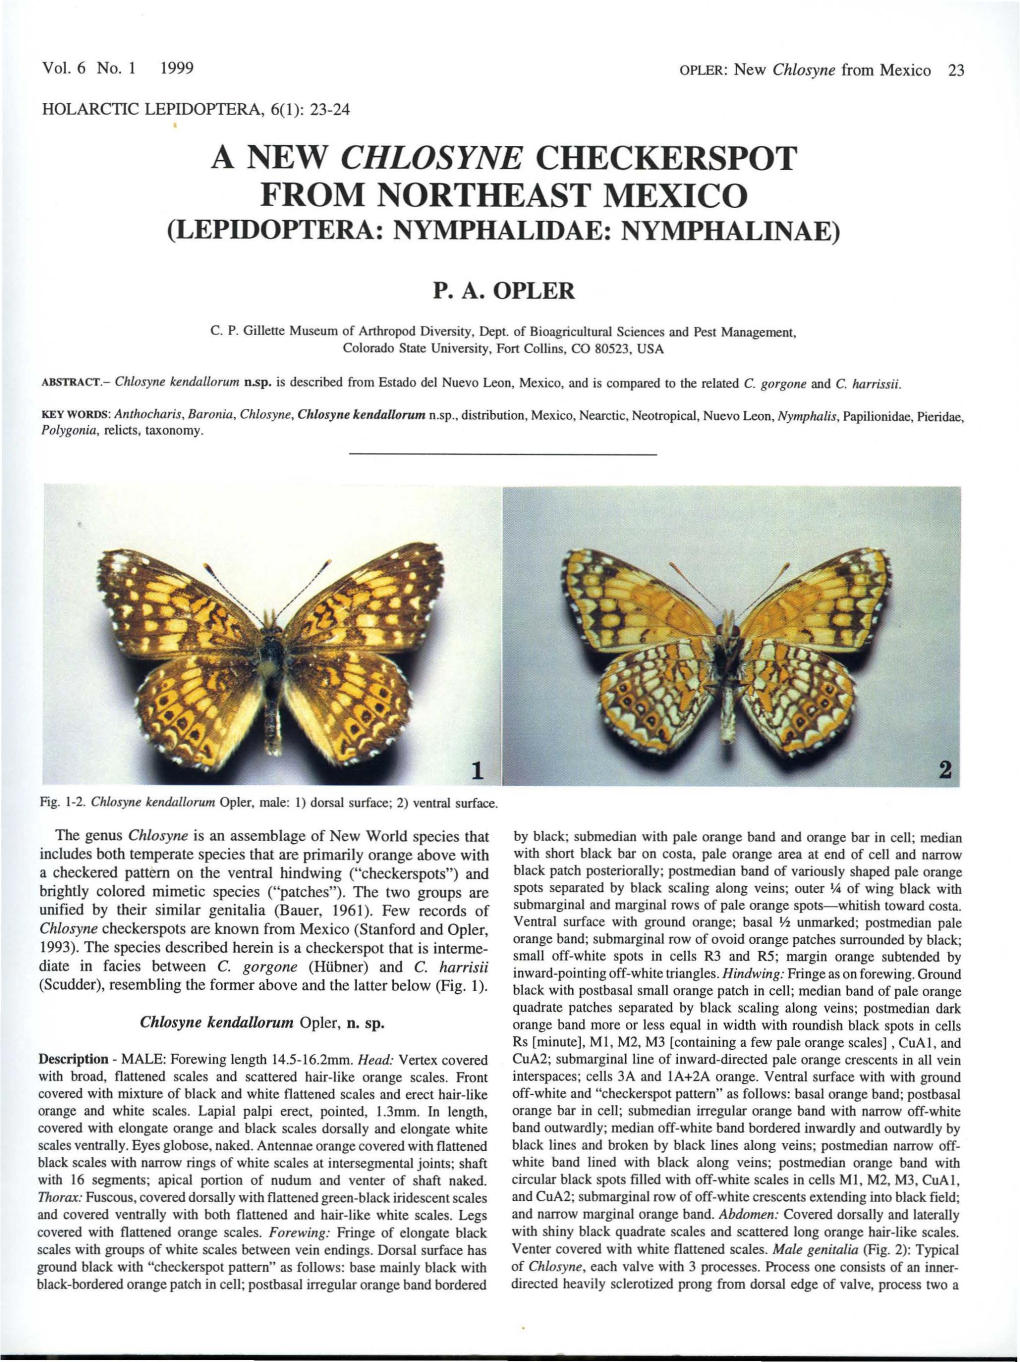 A New Chlosyne Checkerspot from Northeast Mexico (Lepidoptera: Nymphalidae: Nymphalinae)